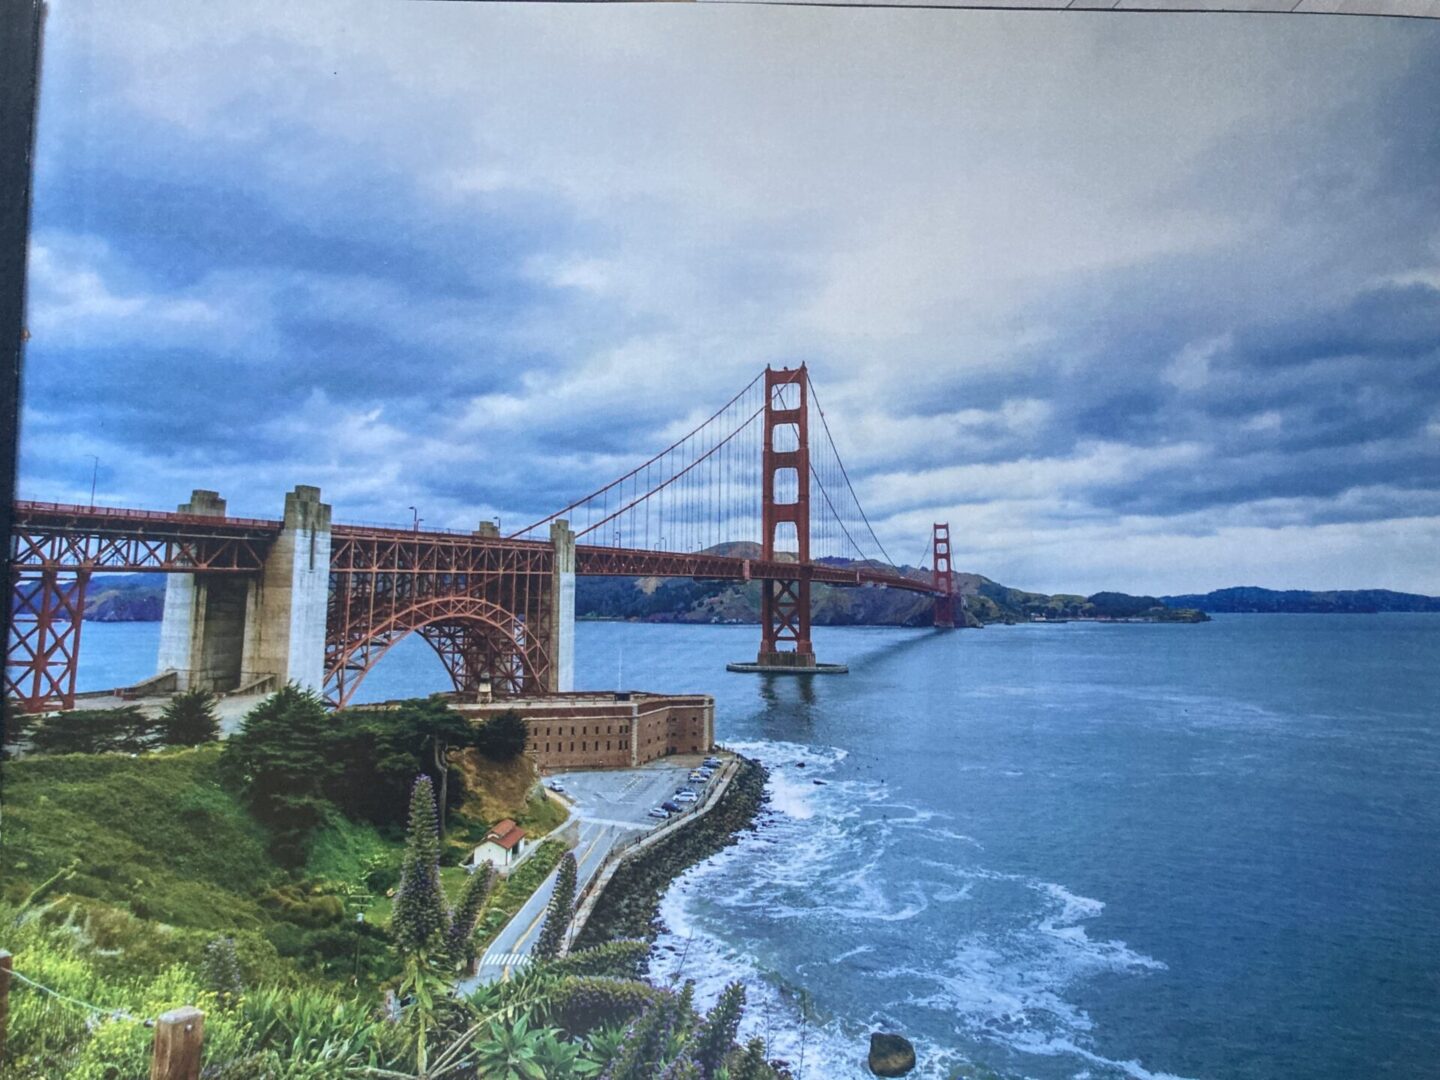 A painting of the golden gate bridge in san francisco.